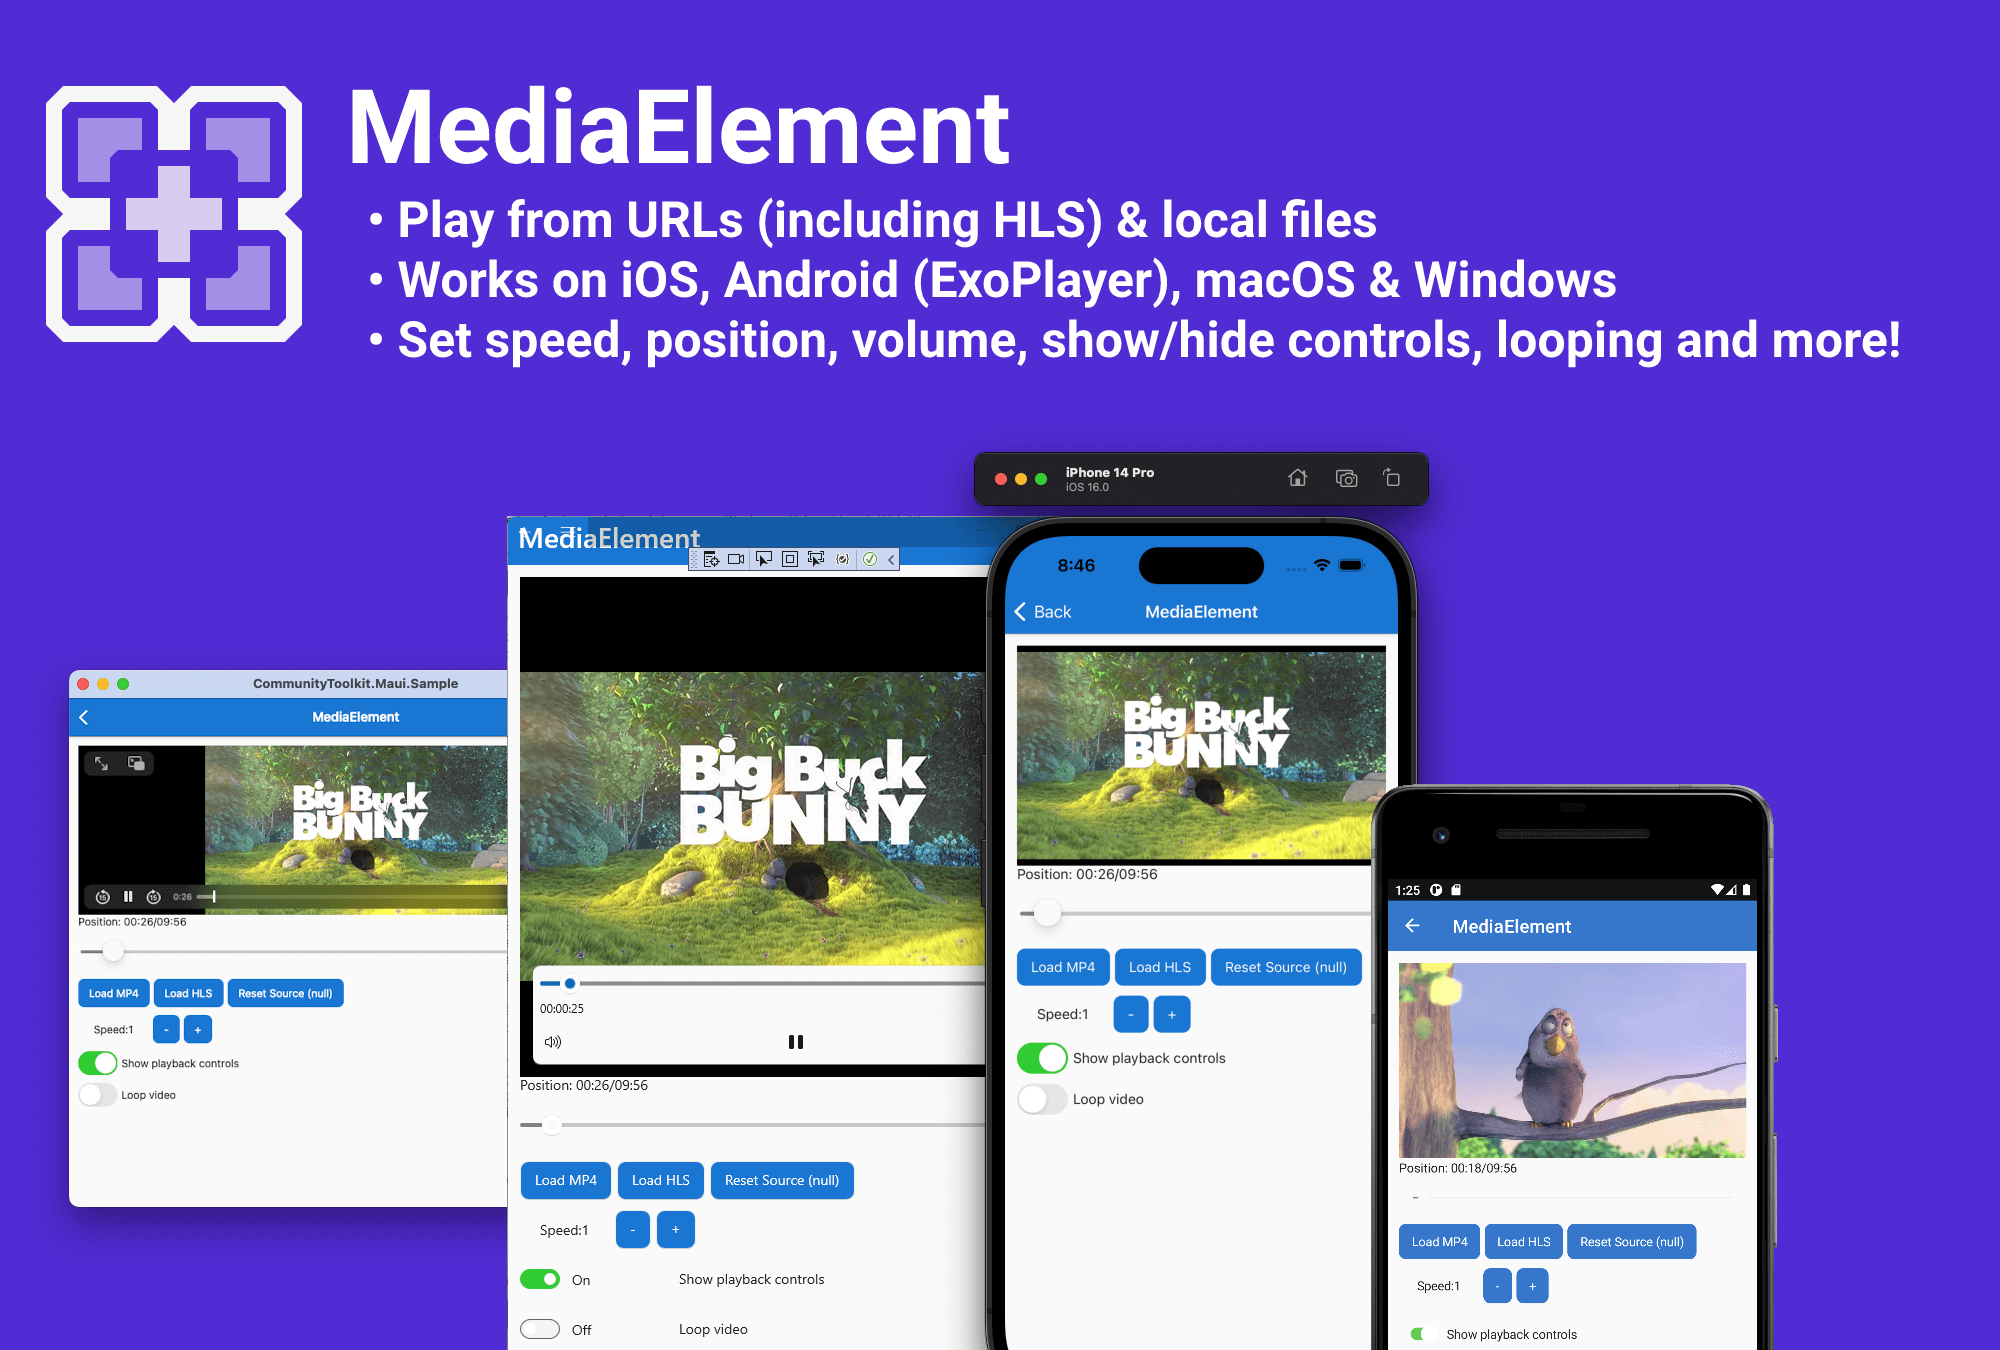 .NET MAUI Community Toolkit MediaElement v1.0 is now available! Check out how to get started with playing audio and (live) video in your .NET MAUI app.